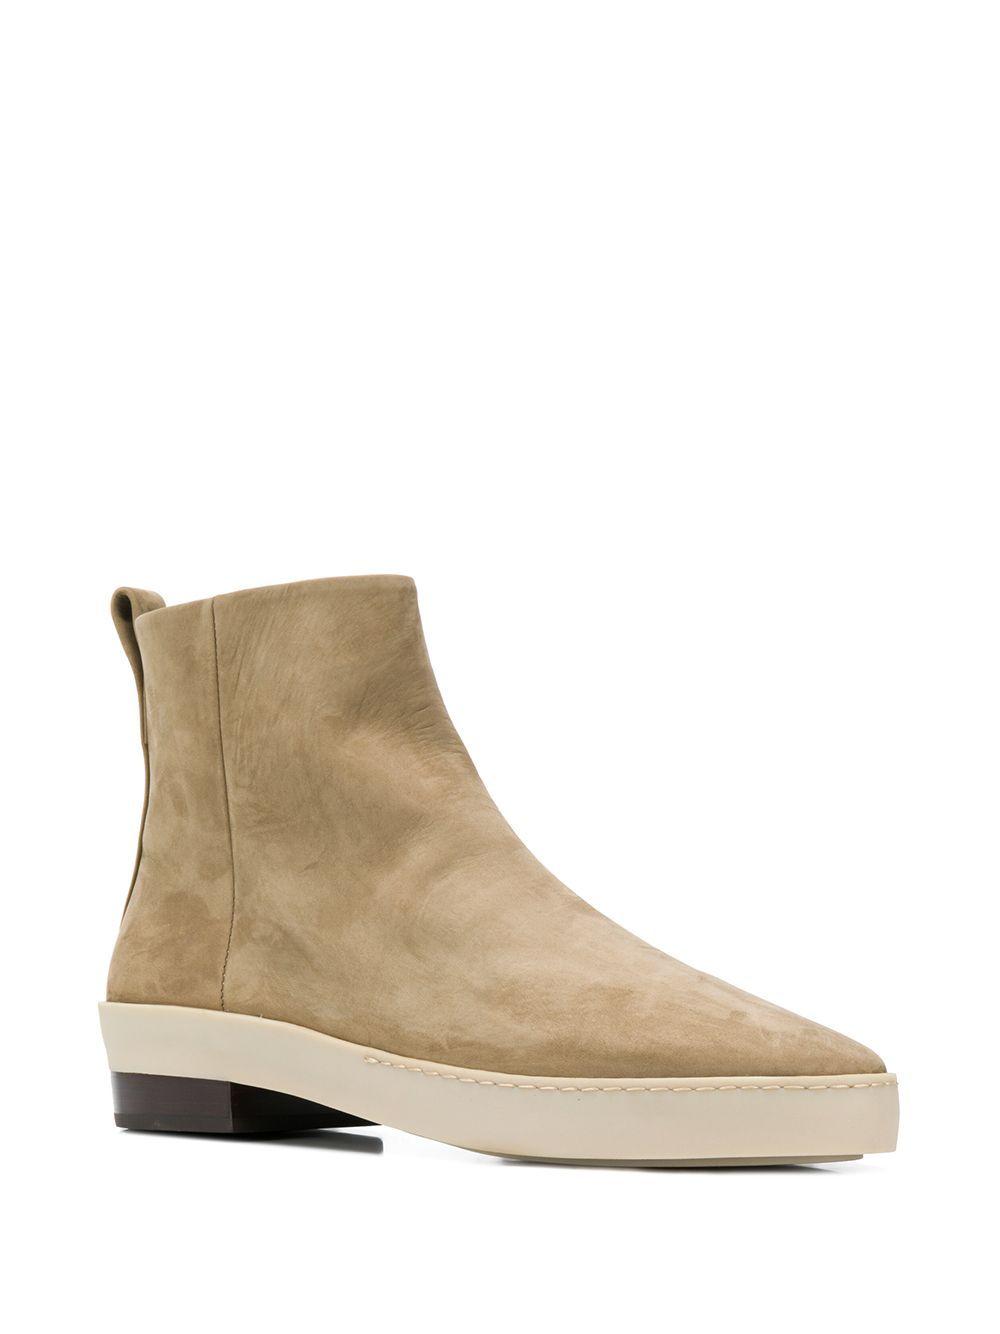 Fear Of God Leather Side Zip Ankle Boots in Brown for Men - Lyst